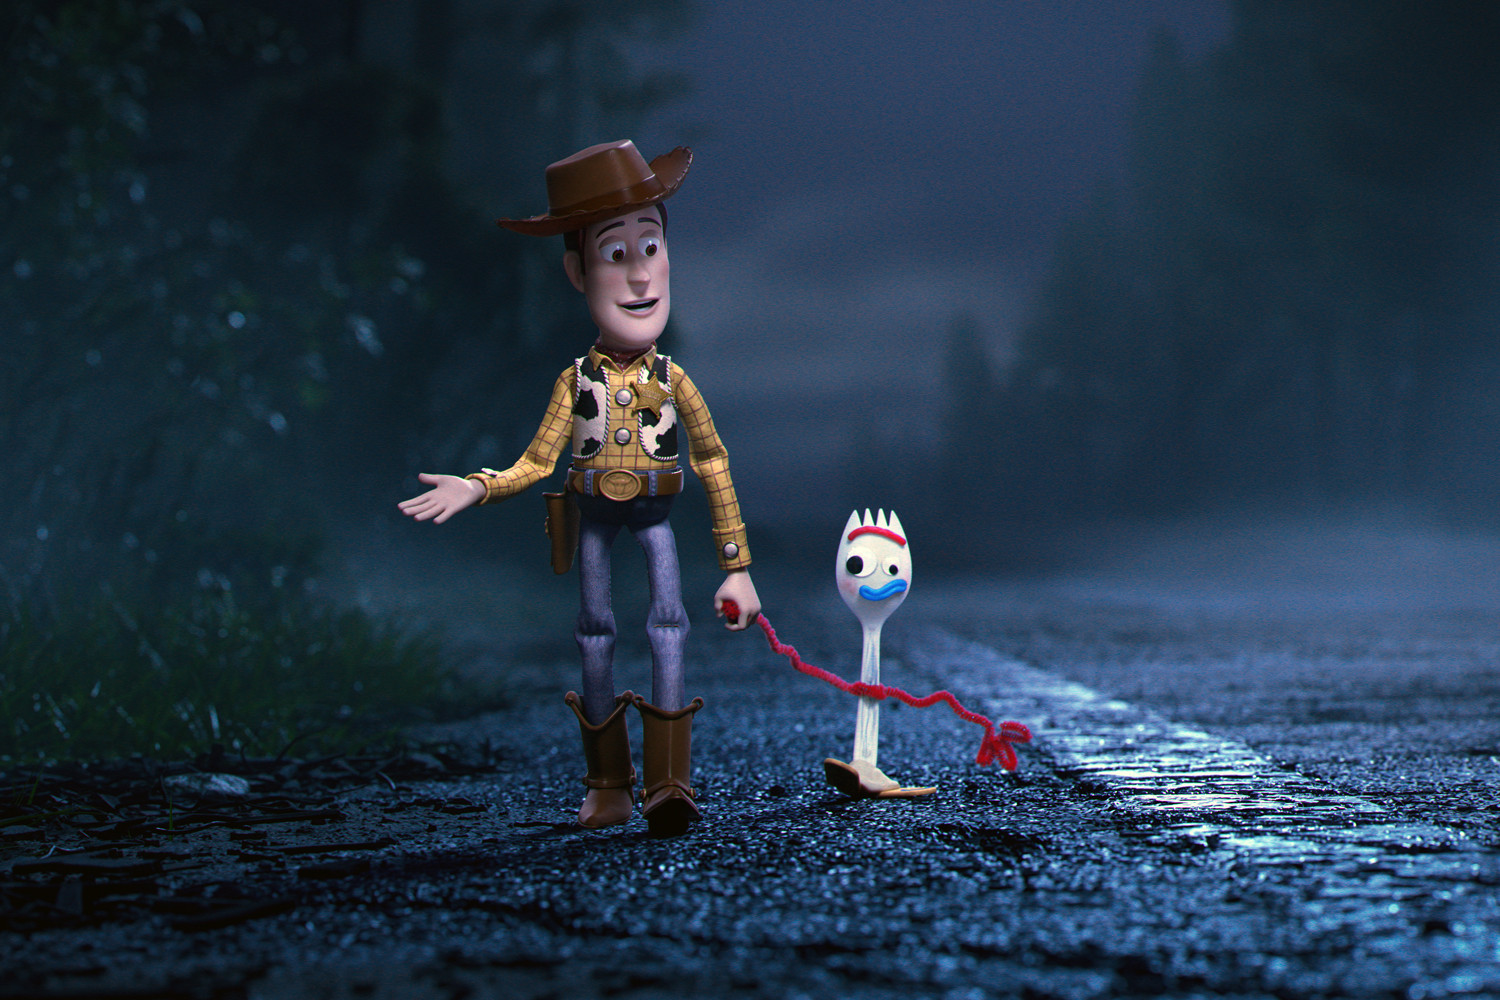 NFC Discusses Toy Story 4 and Pixar’s Storytelling Genius